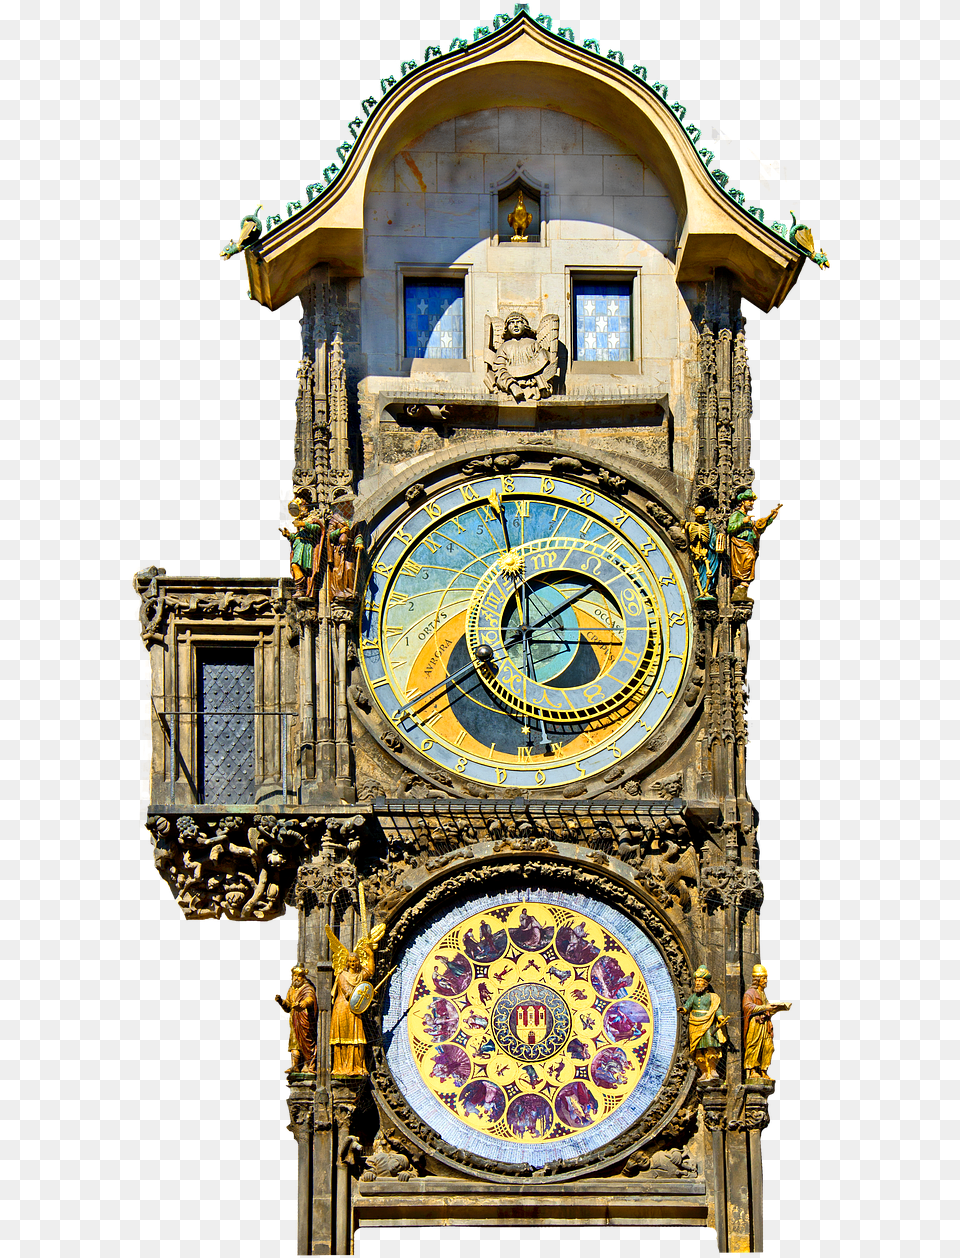 Clockold Town Hallastronomicalmoon Phases Prague Astronomical Clock, Architecture, Building, Clock Tower, Tower Free Transparent Png